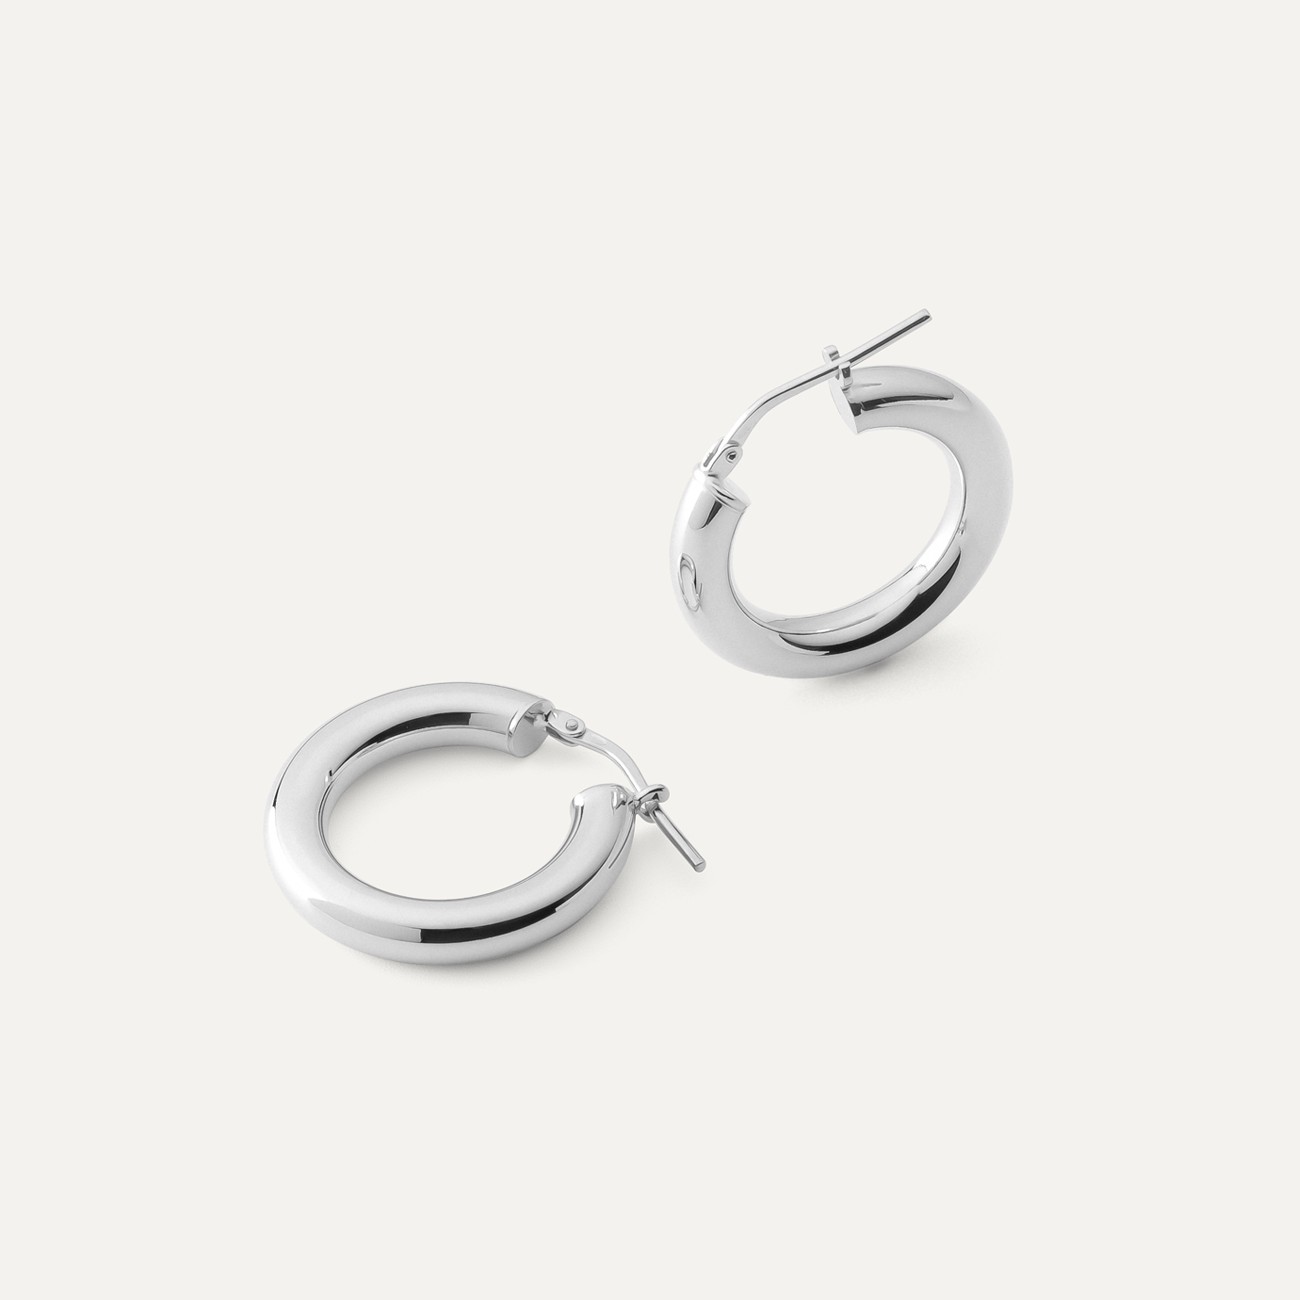 Round hoop earrings 3 cm with clasp, silver 925